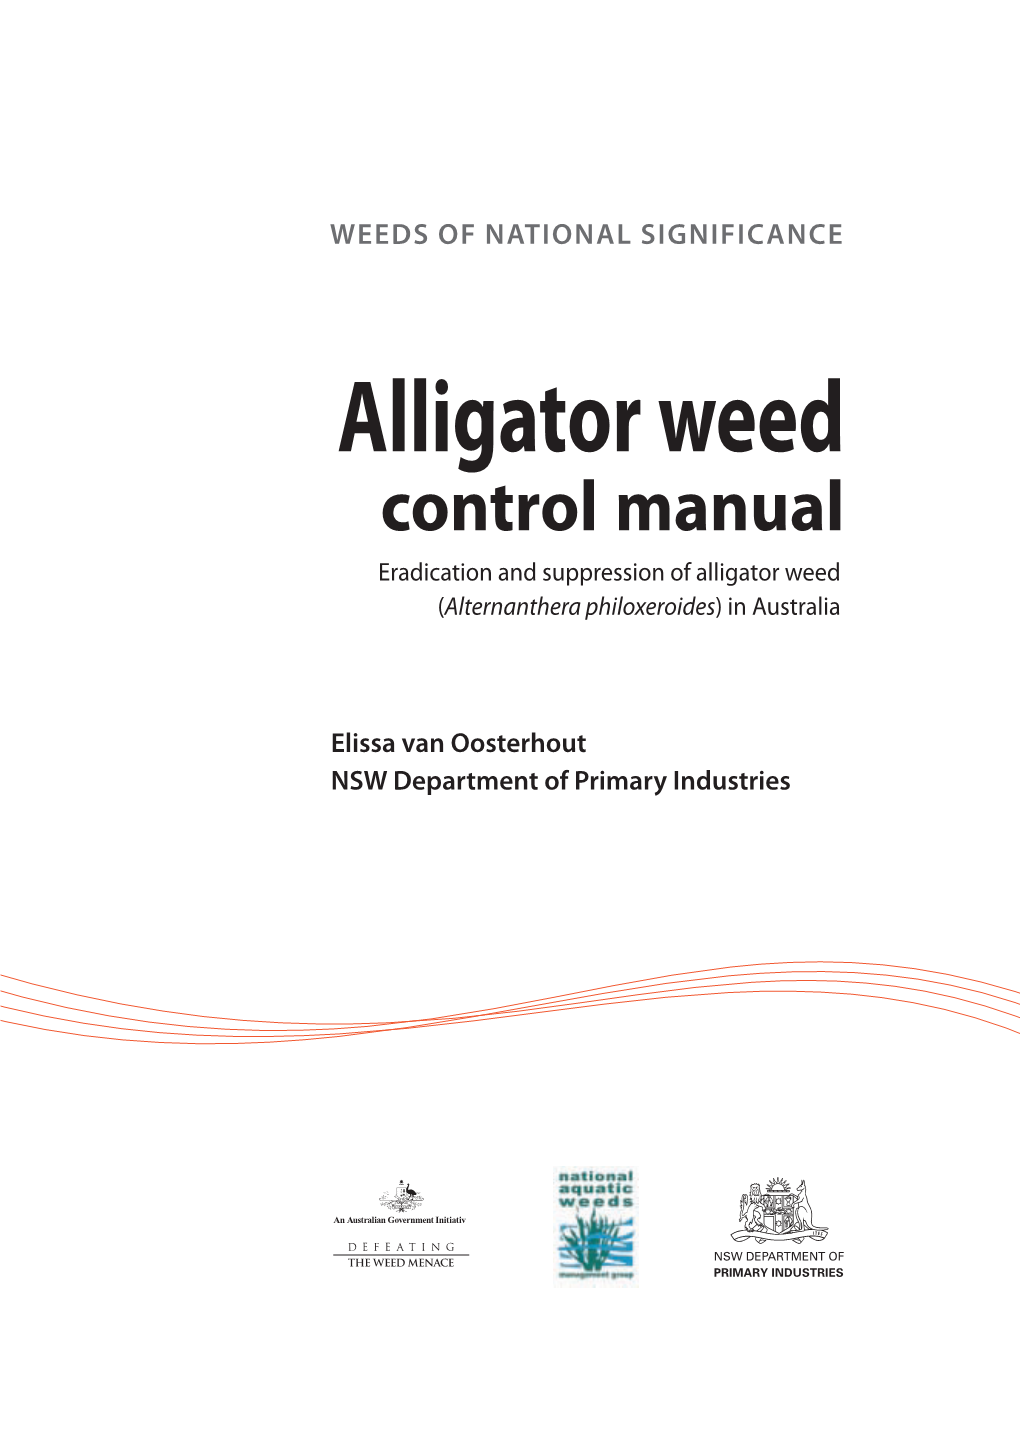 Alligator Weed Control Manual Eradication and Suppression of Alligator Weed (Alternanthera Philoxeroides) in Australia